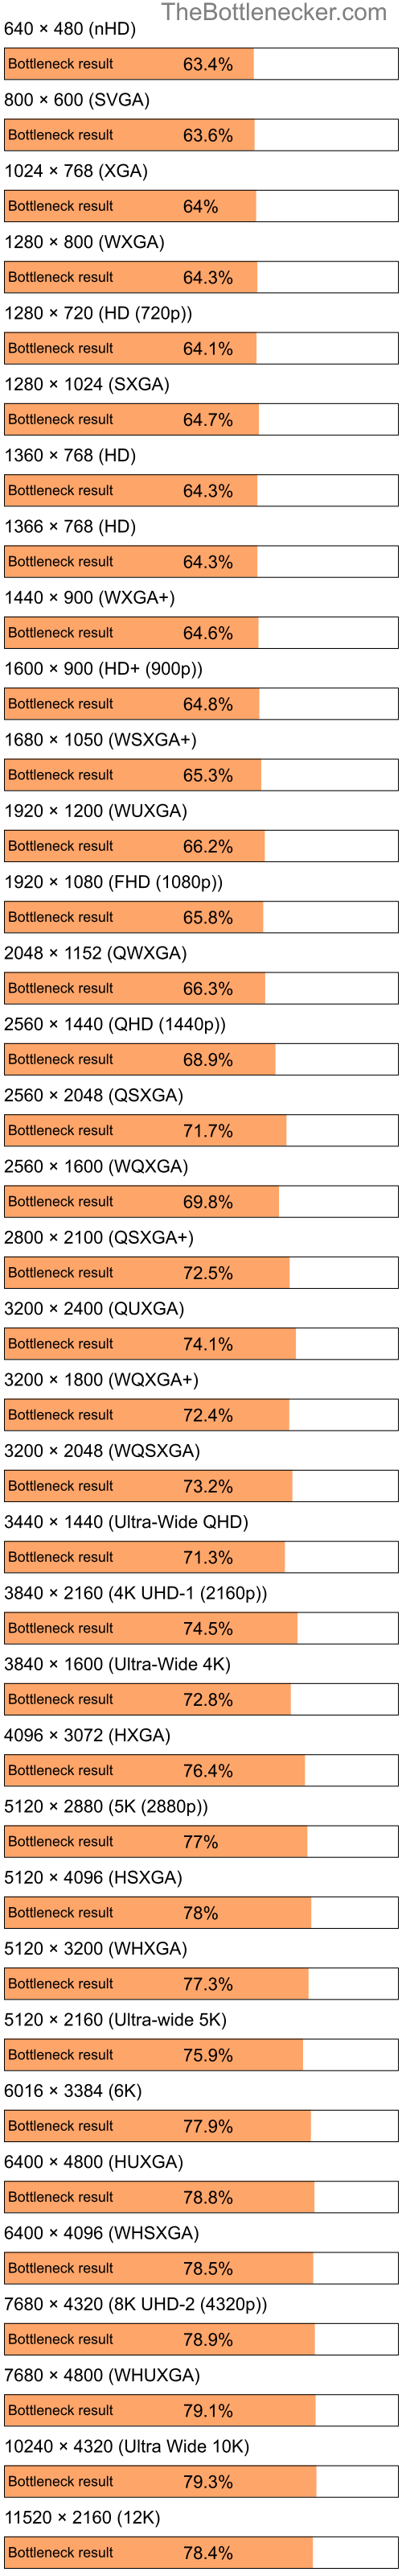 Bottleneck results by resolution for Intel Celeron M 410 and AMD Mobility Radeon X1600 in General Tasks